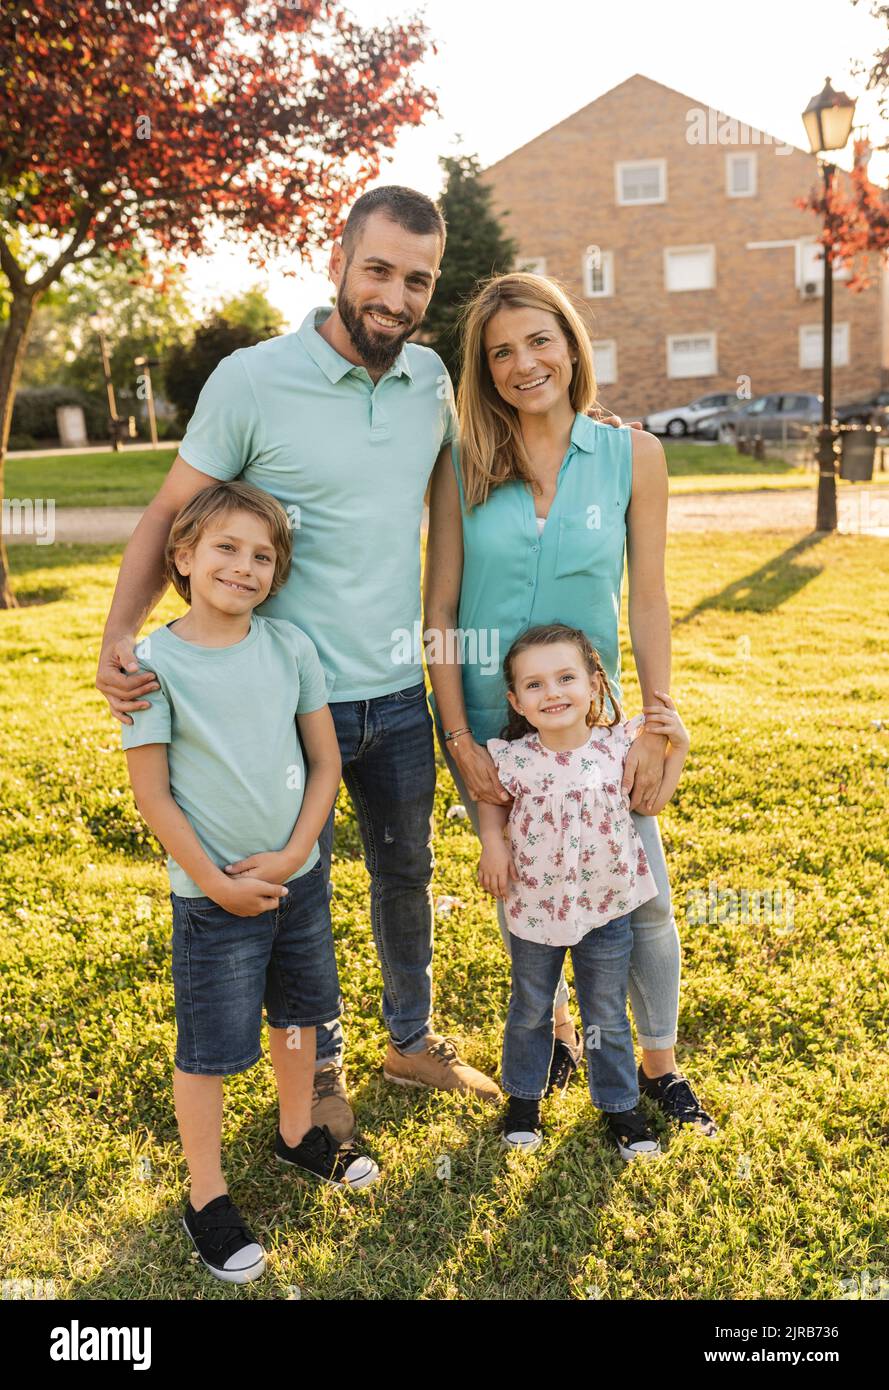 Parents standing with son and daughter at park Stock Photo